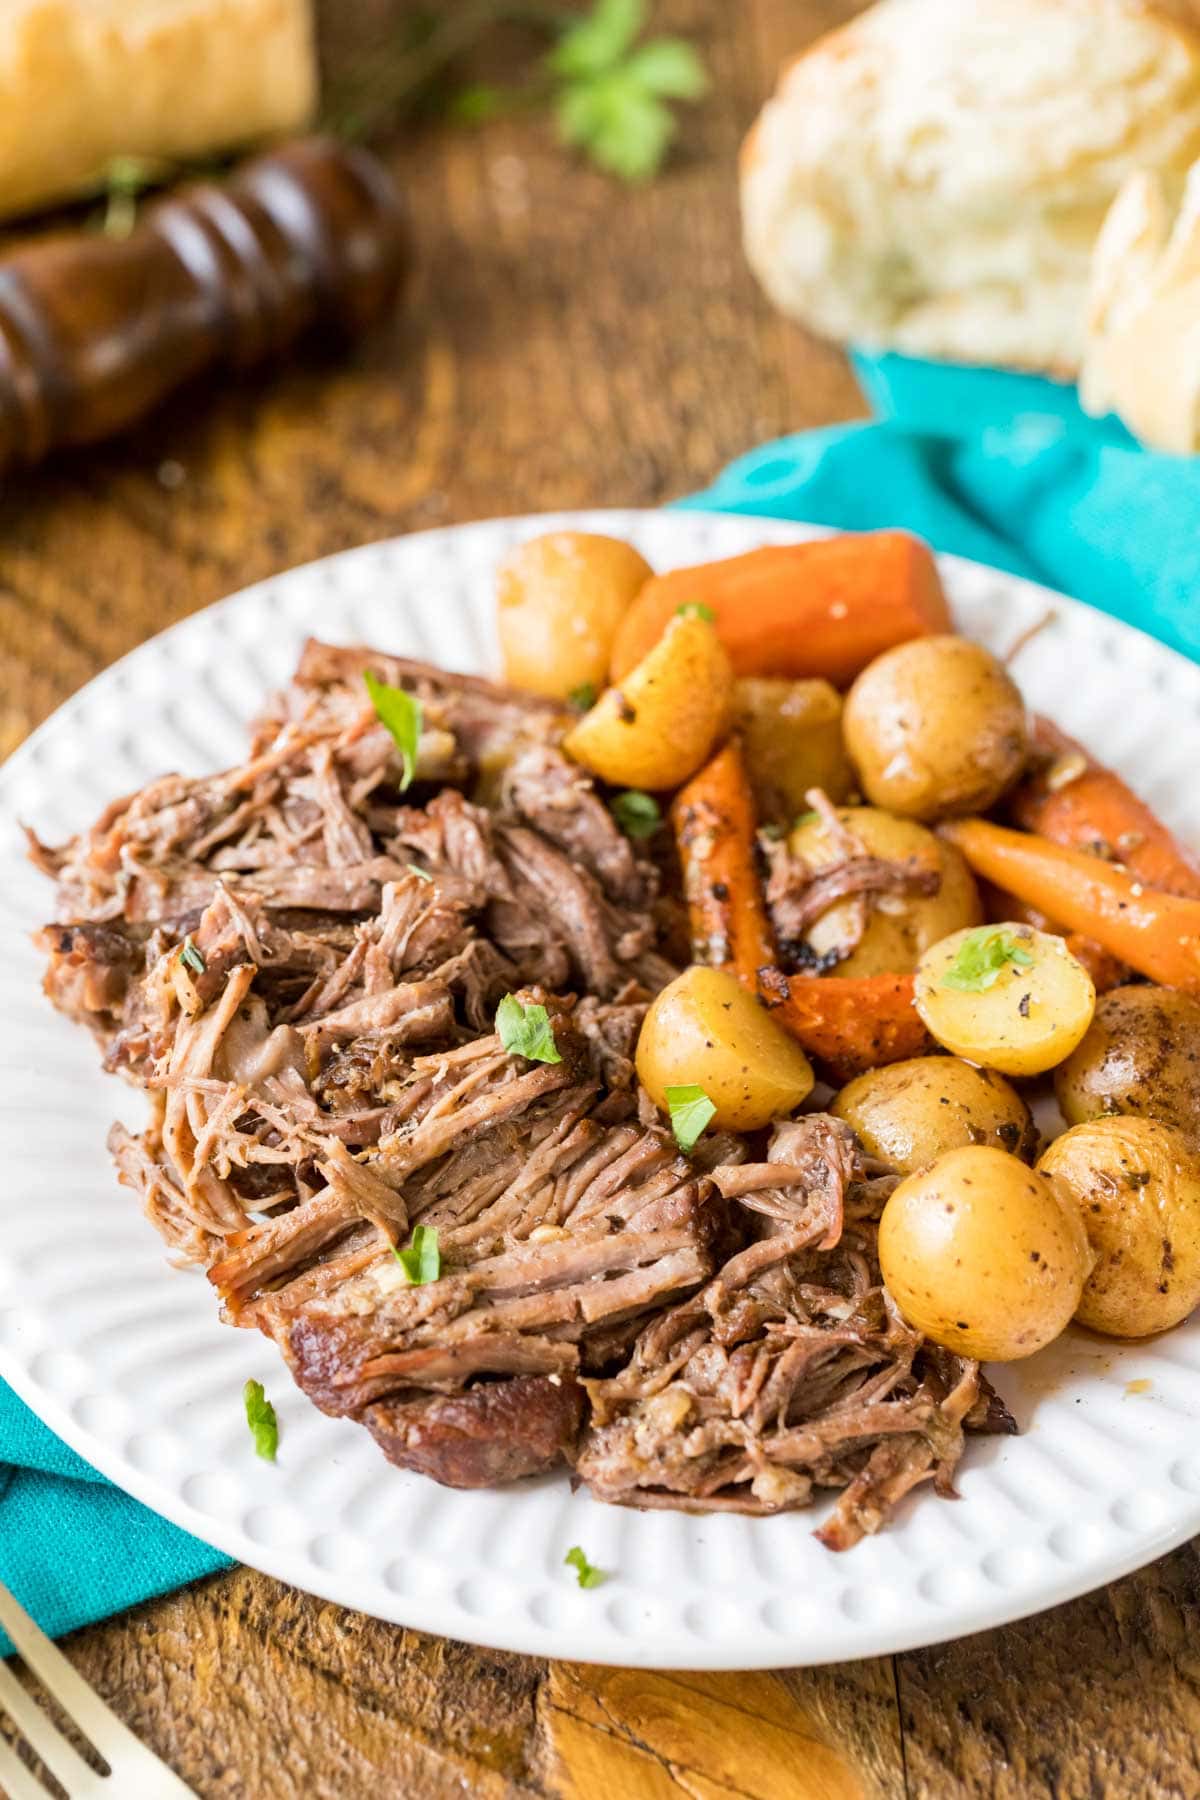 Plate of beef pot roast with baby potatoes and carrots.